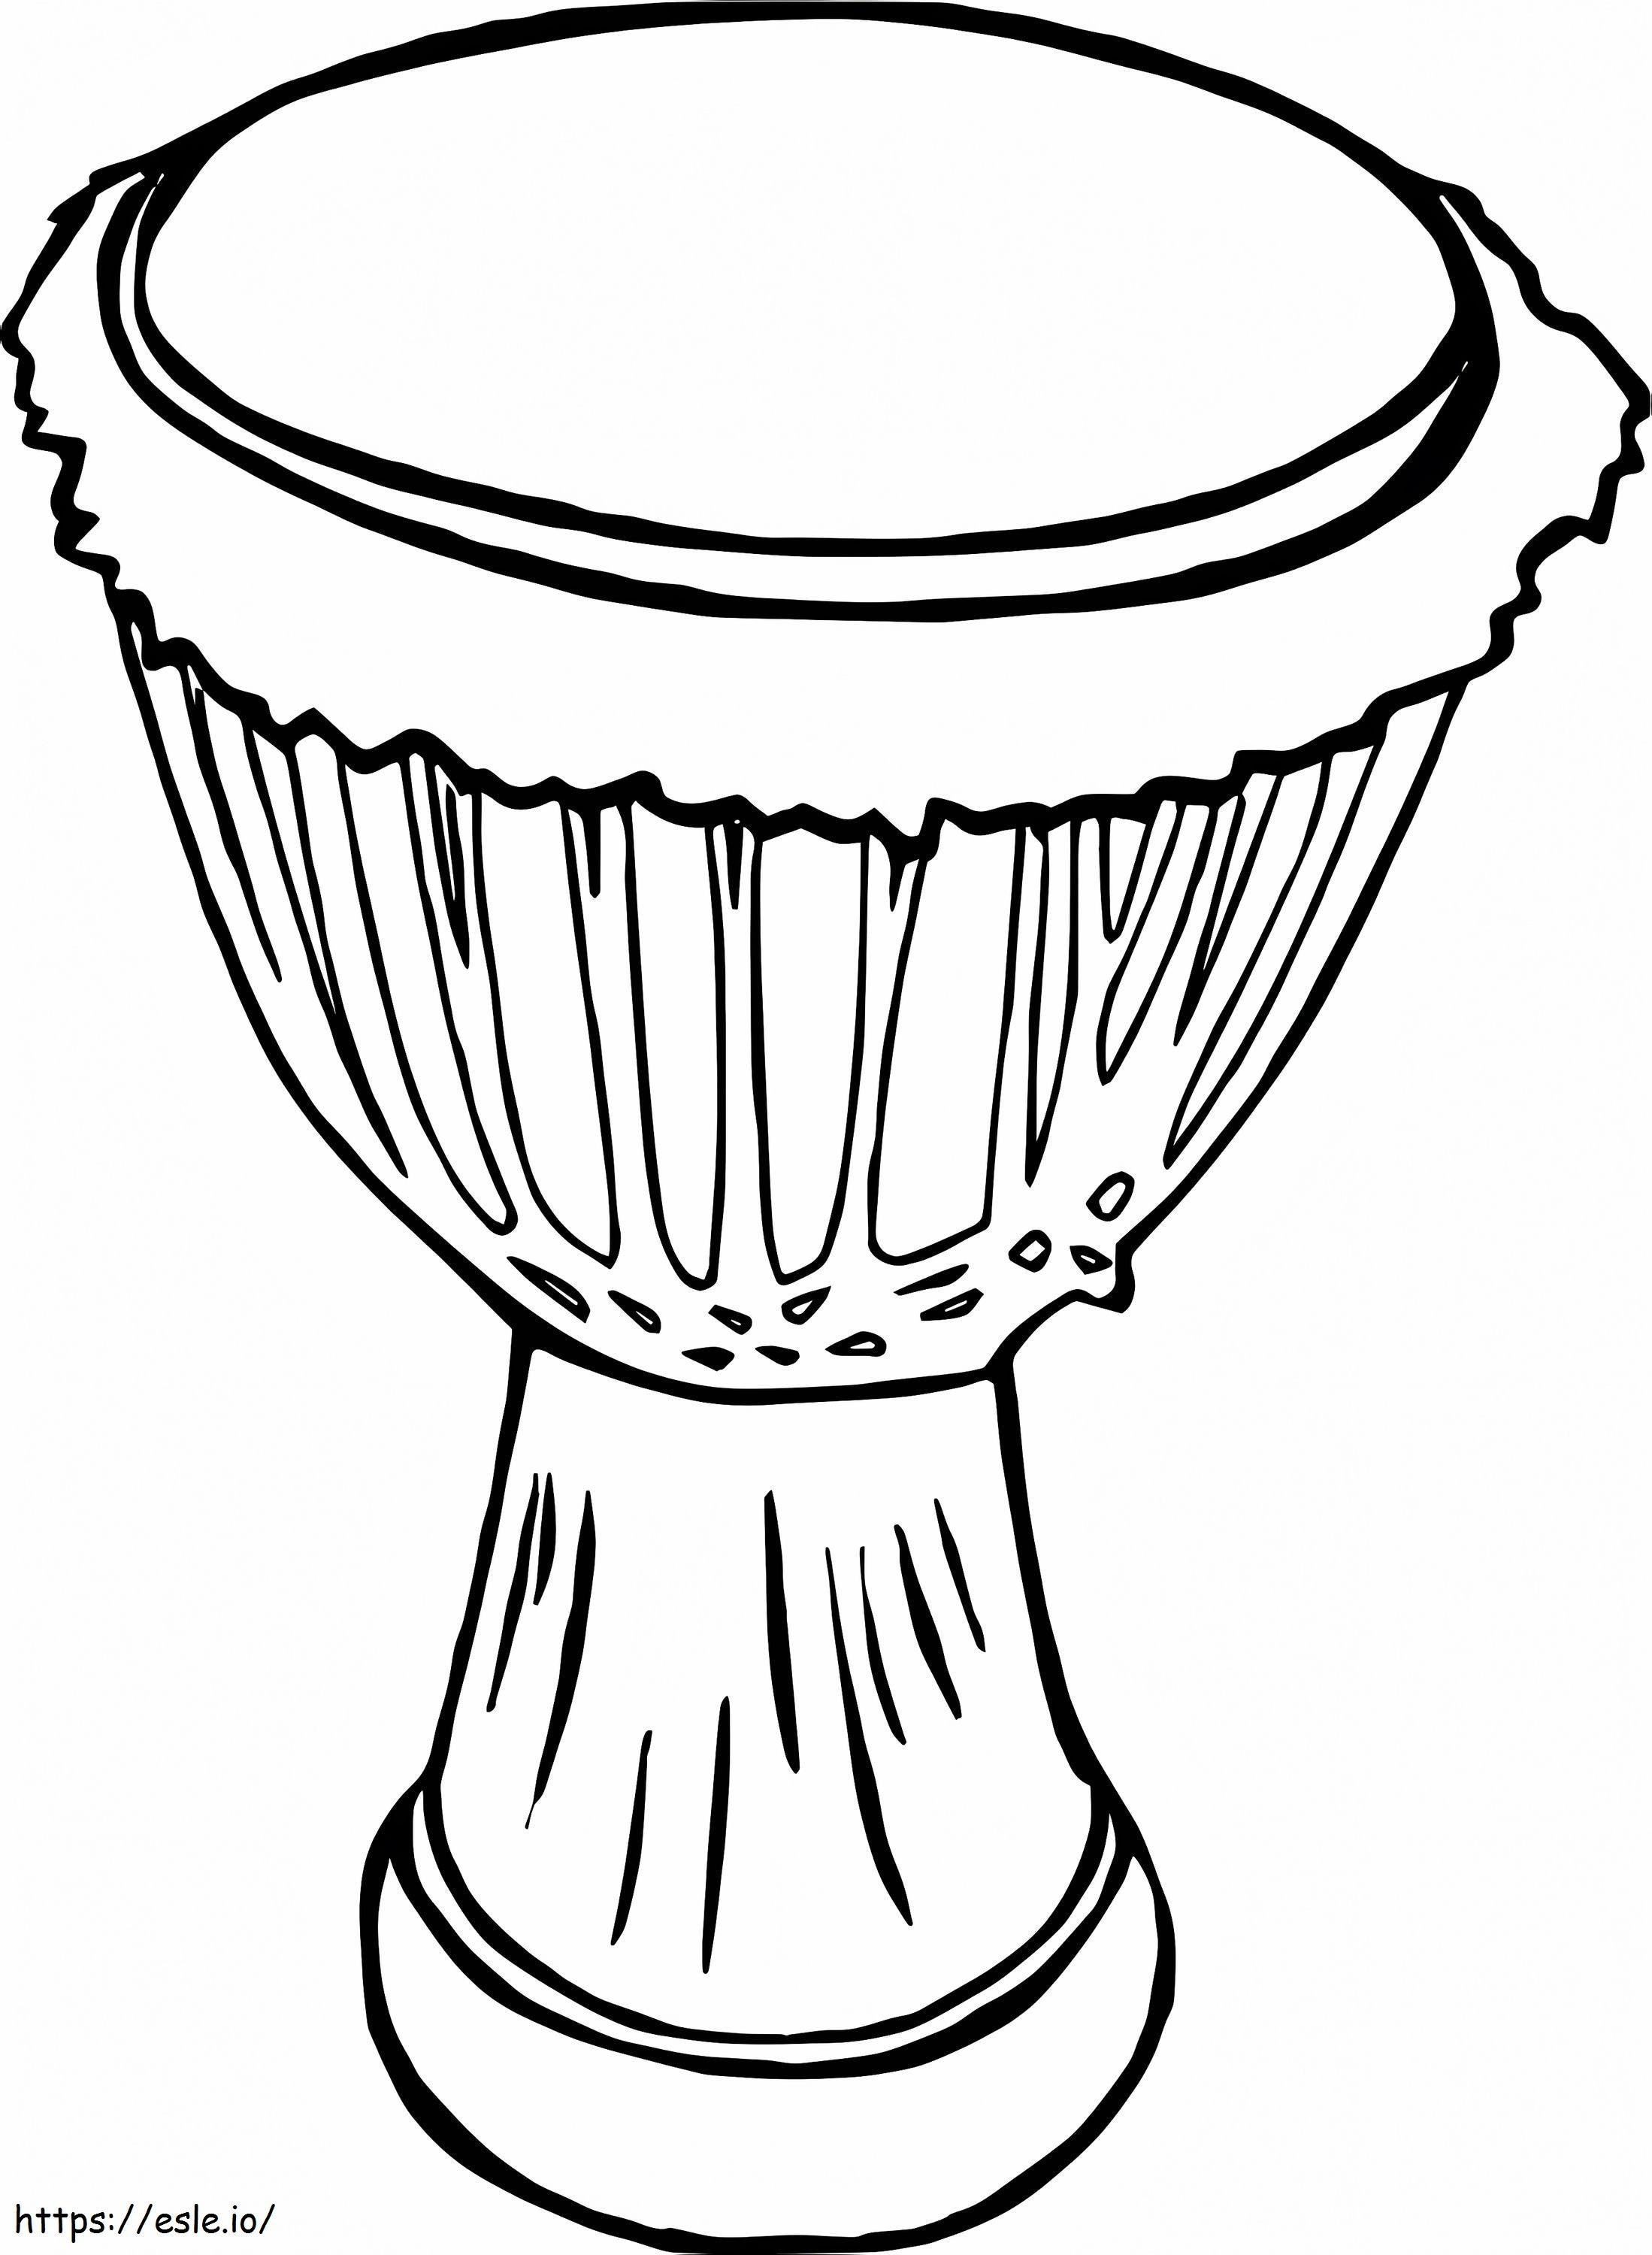 Awesome Horn coloring page